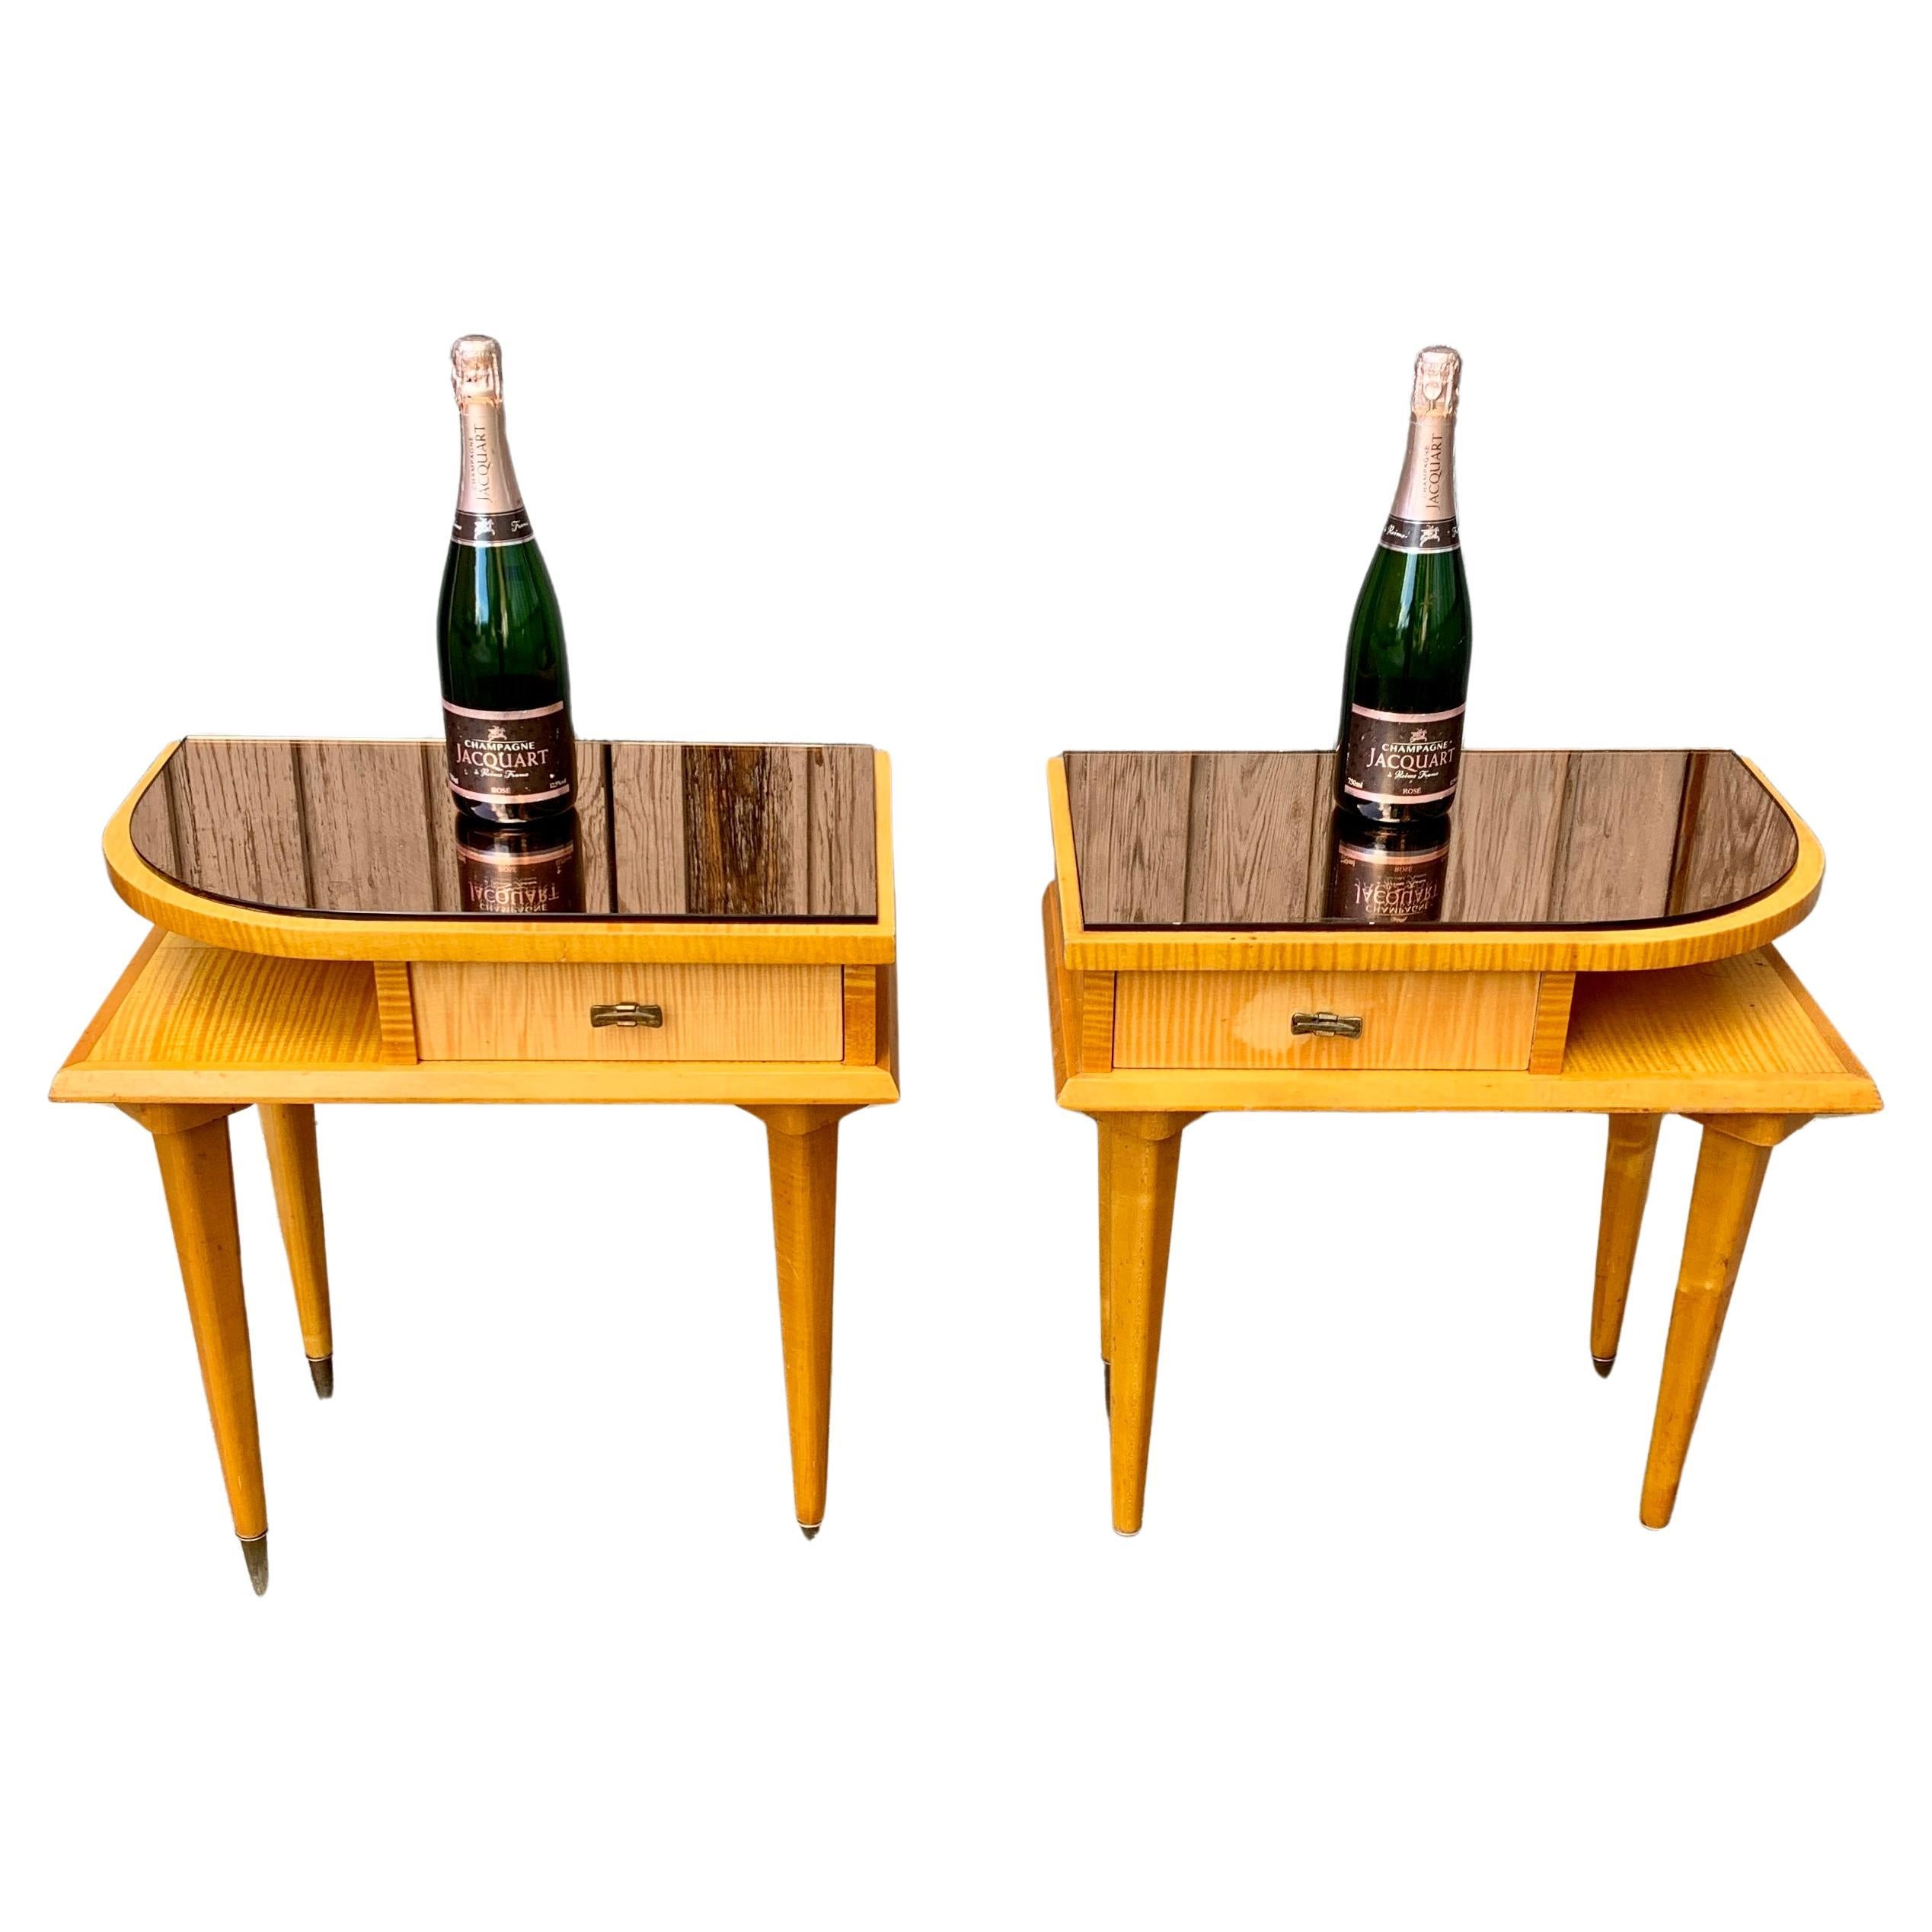 Pair of Mid-Century French Nightstands In Birch Wood